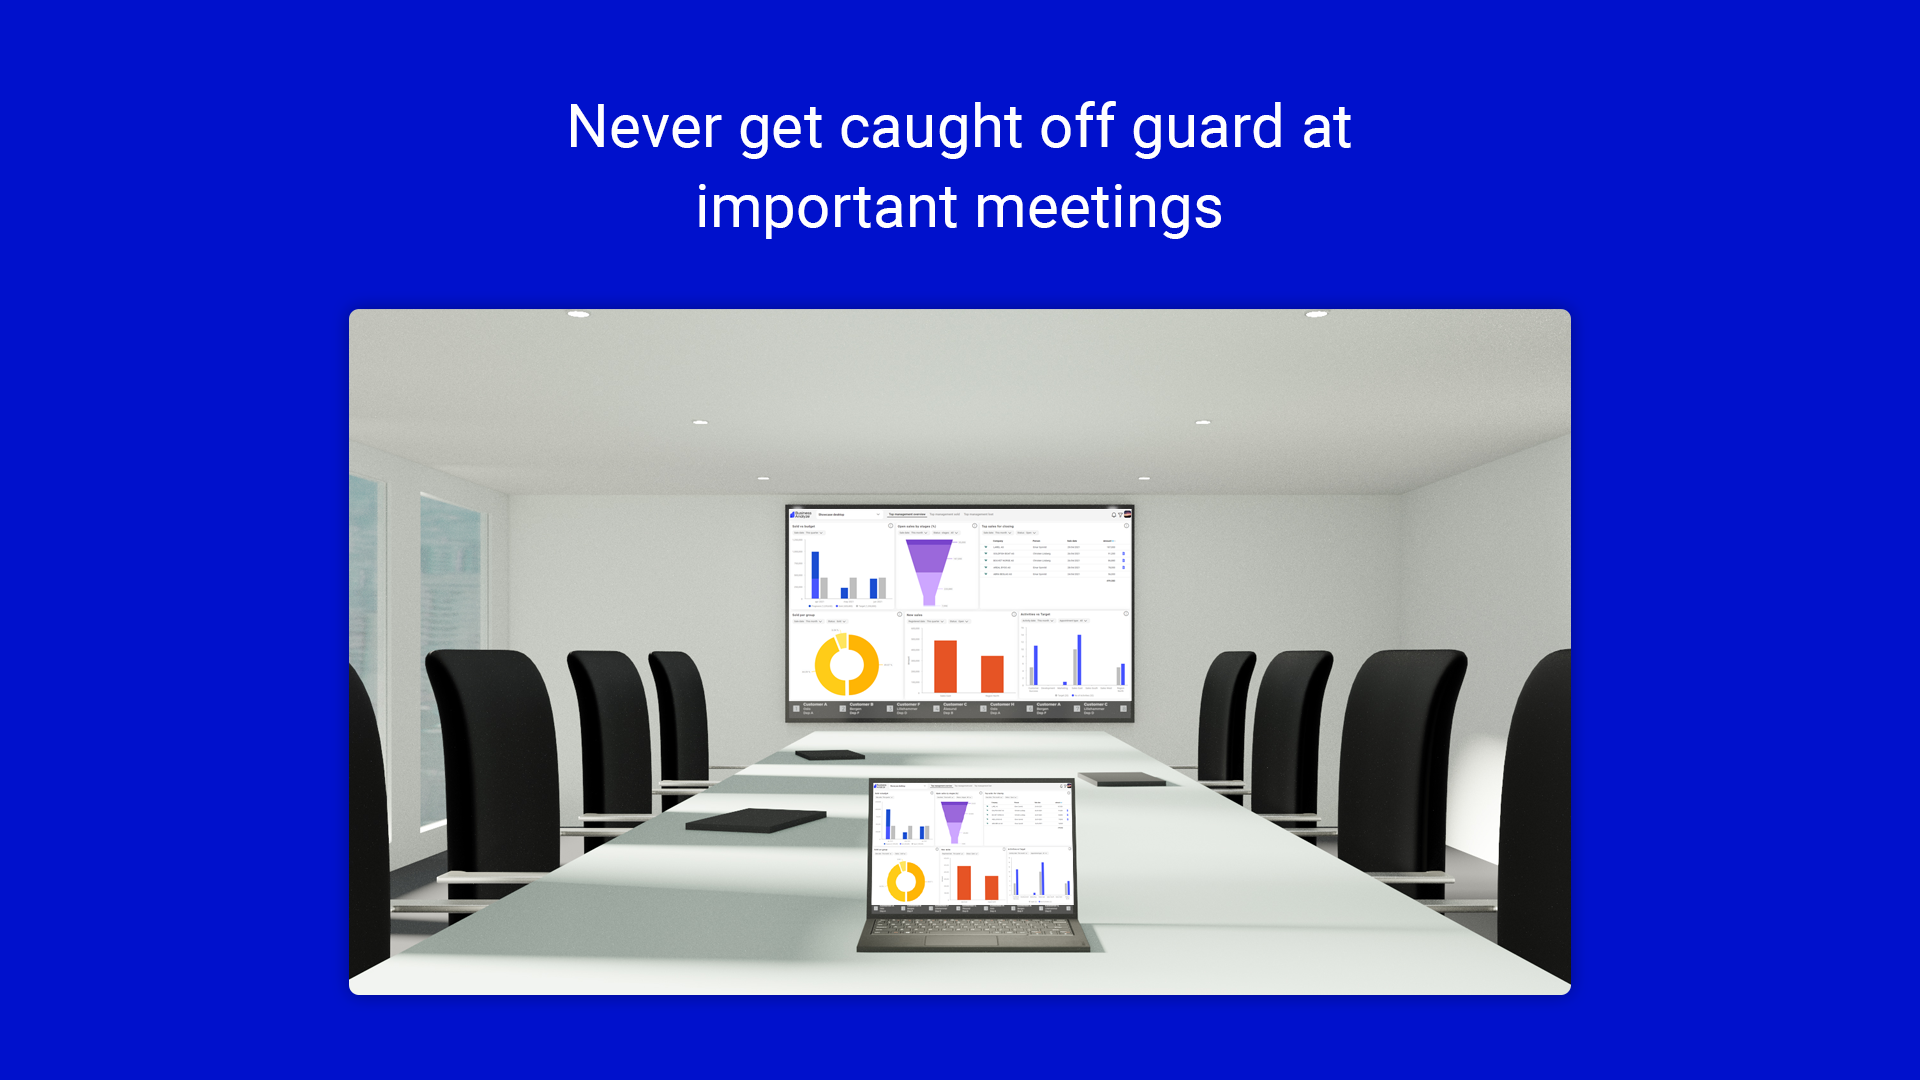 9. Never get caught off guard at important meetings.